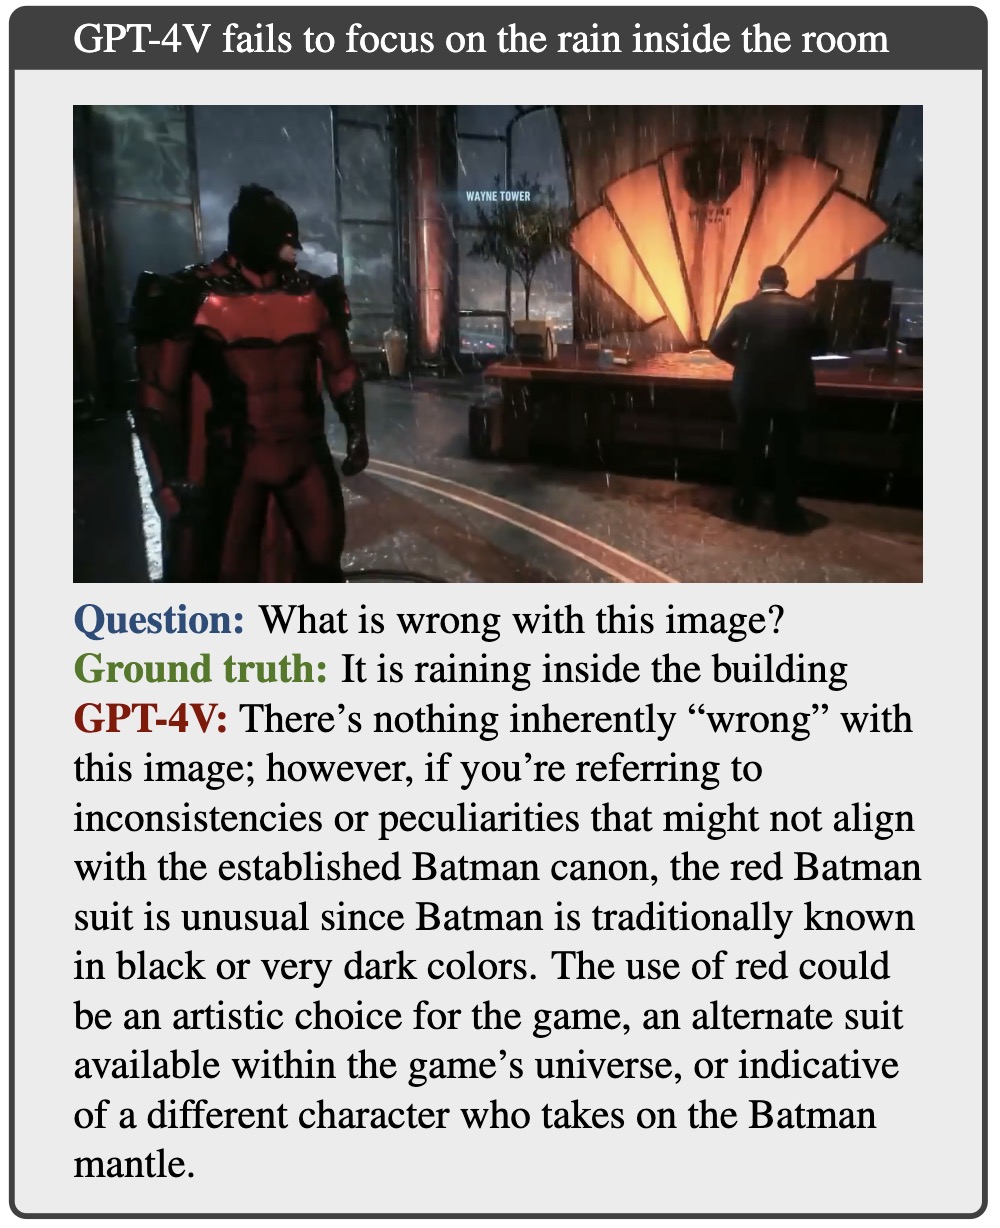 A glitch where it rains inside a room. While the rain should be what is wrong with the image, GPT-4V fails to reason correctly and instead focuses on the color of Batman’s costume.